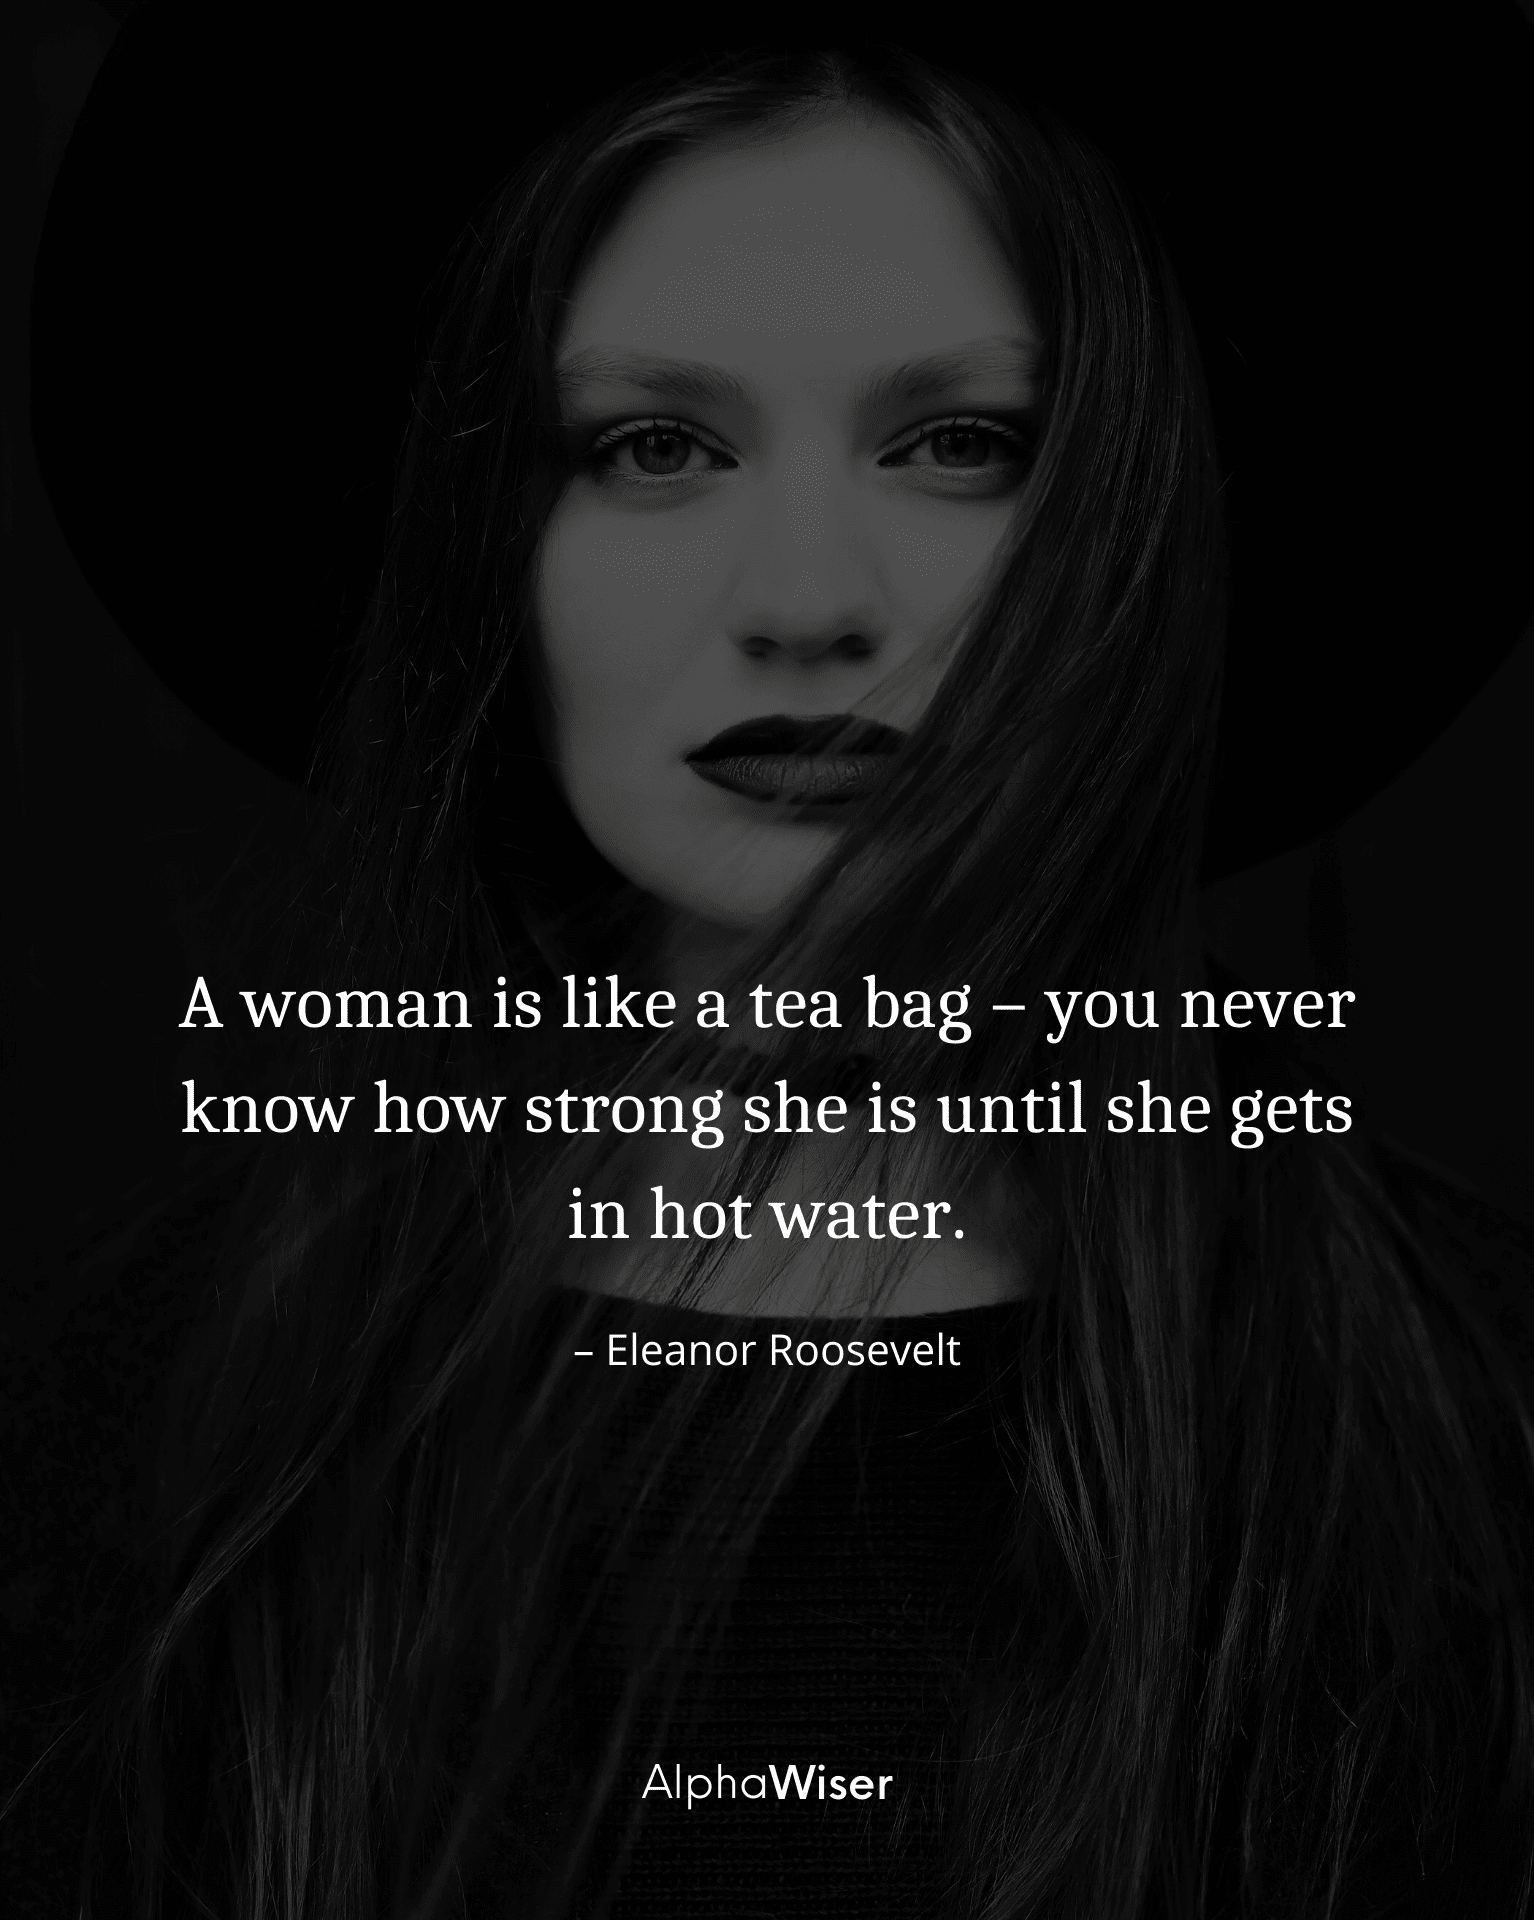 A woman is like a teabag – you never know how strong she is until she gets in hot water.